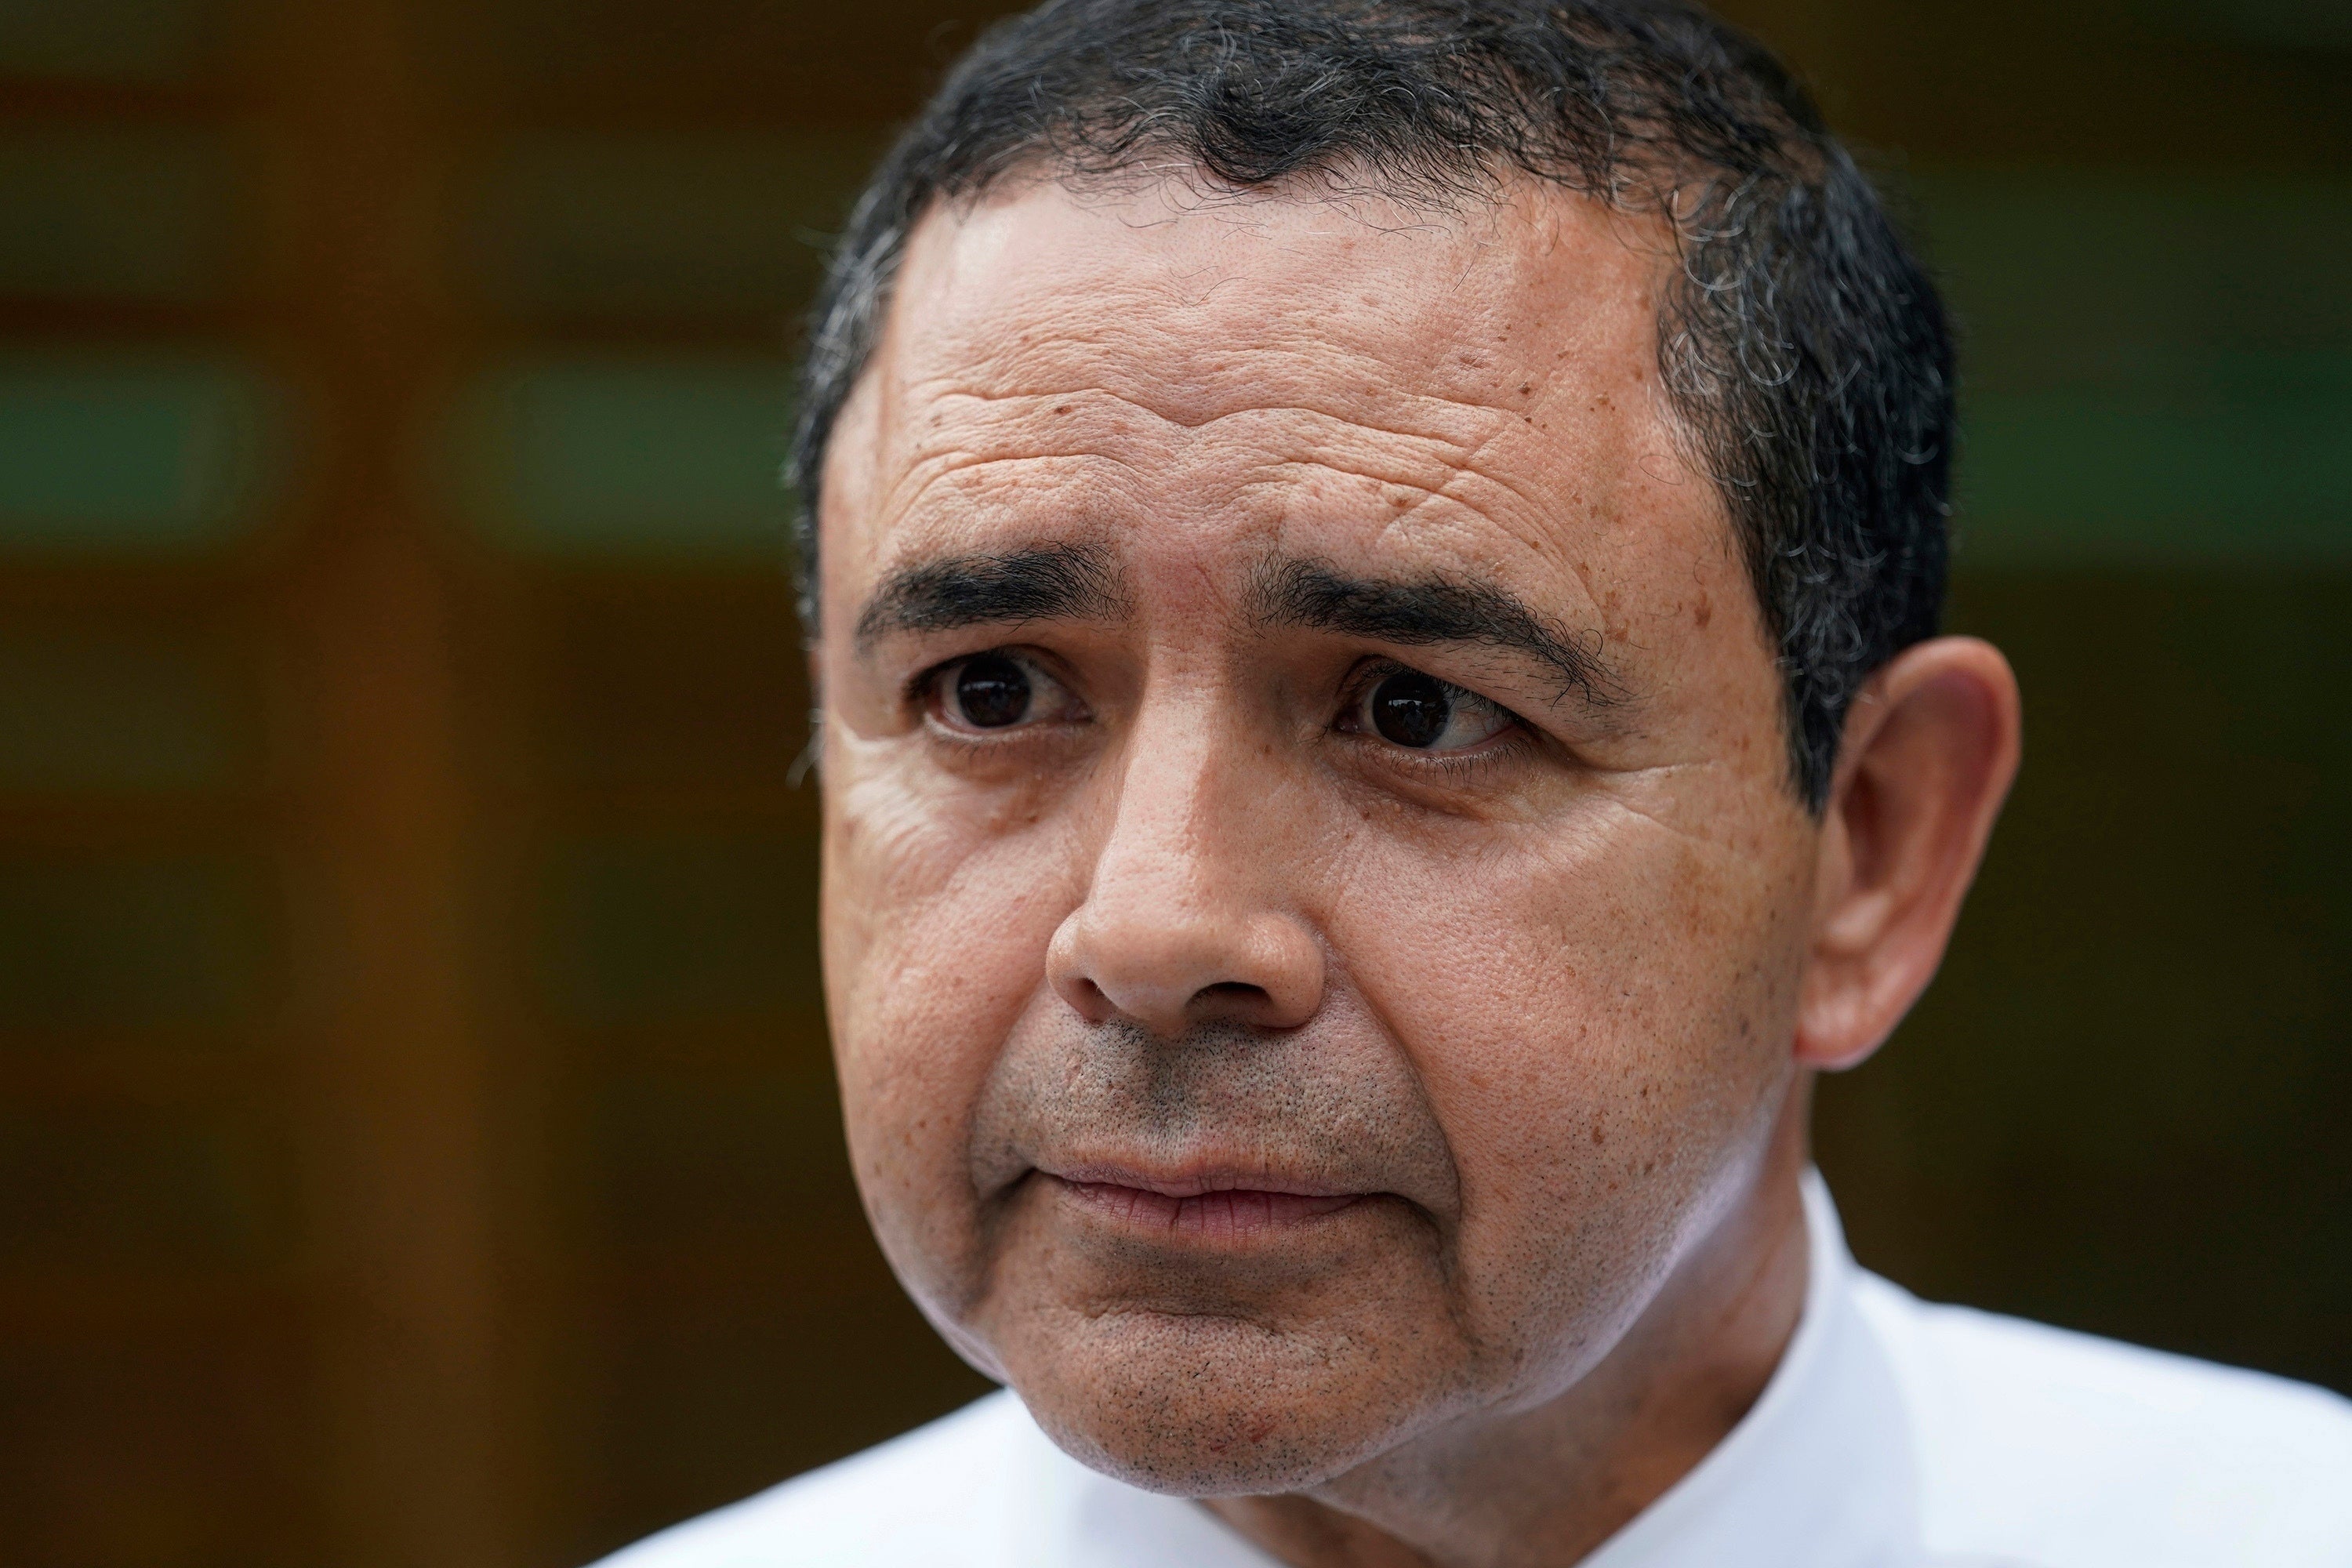 Texas Democratic Representative Henry Cuellar and his wife have been indicted by federal prosecutors on charges of conspiracy and bribery, after allegedly taking nearly $600,000 from a Azerbaijani controlled company and a Mexican bank